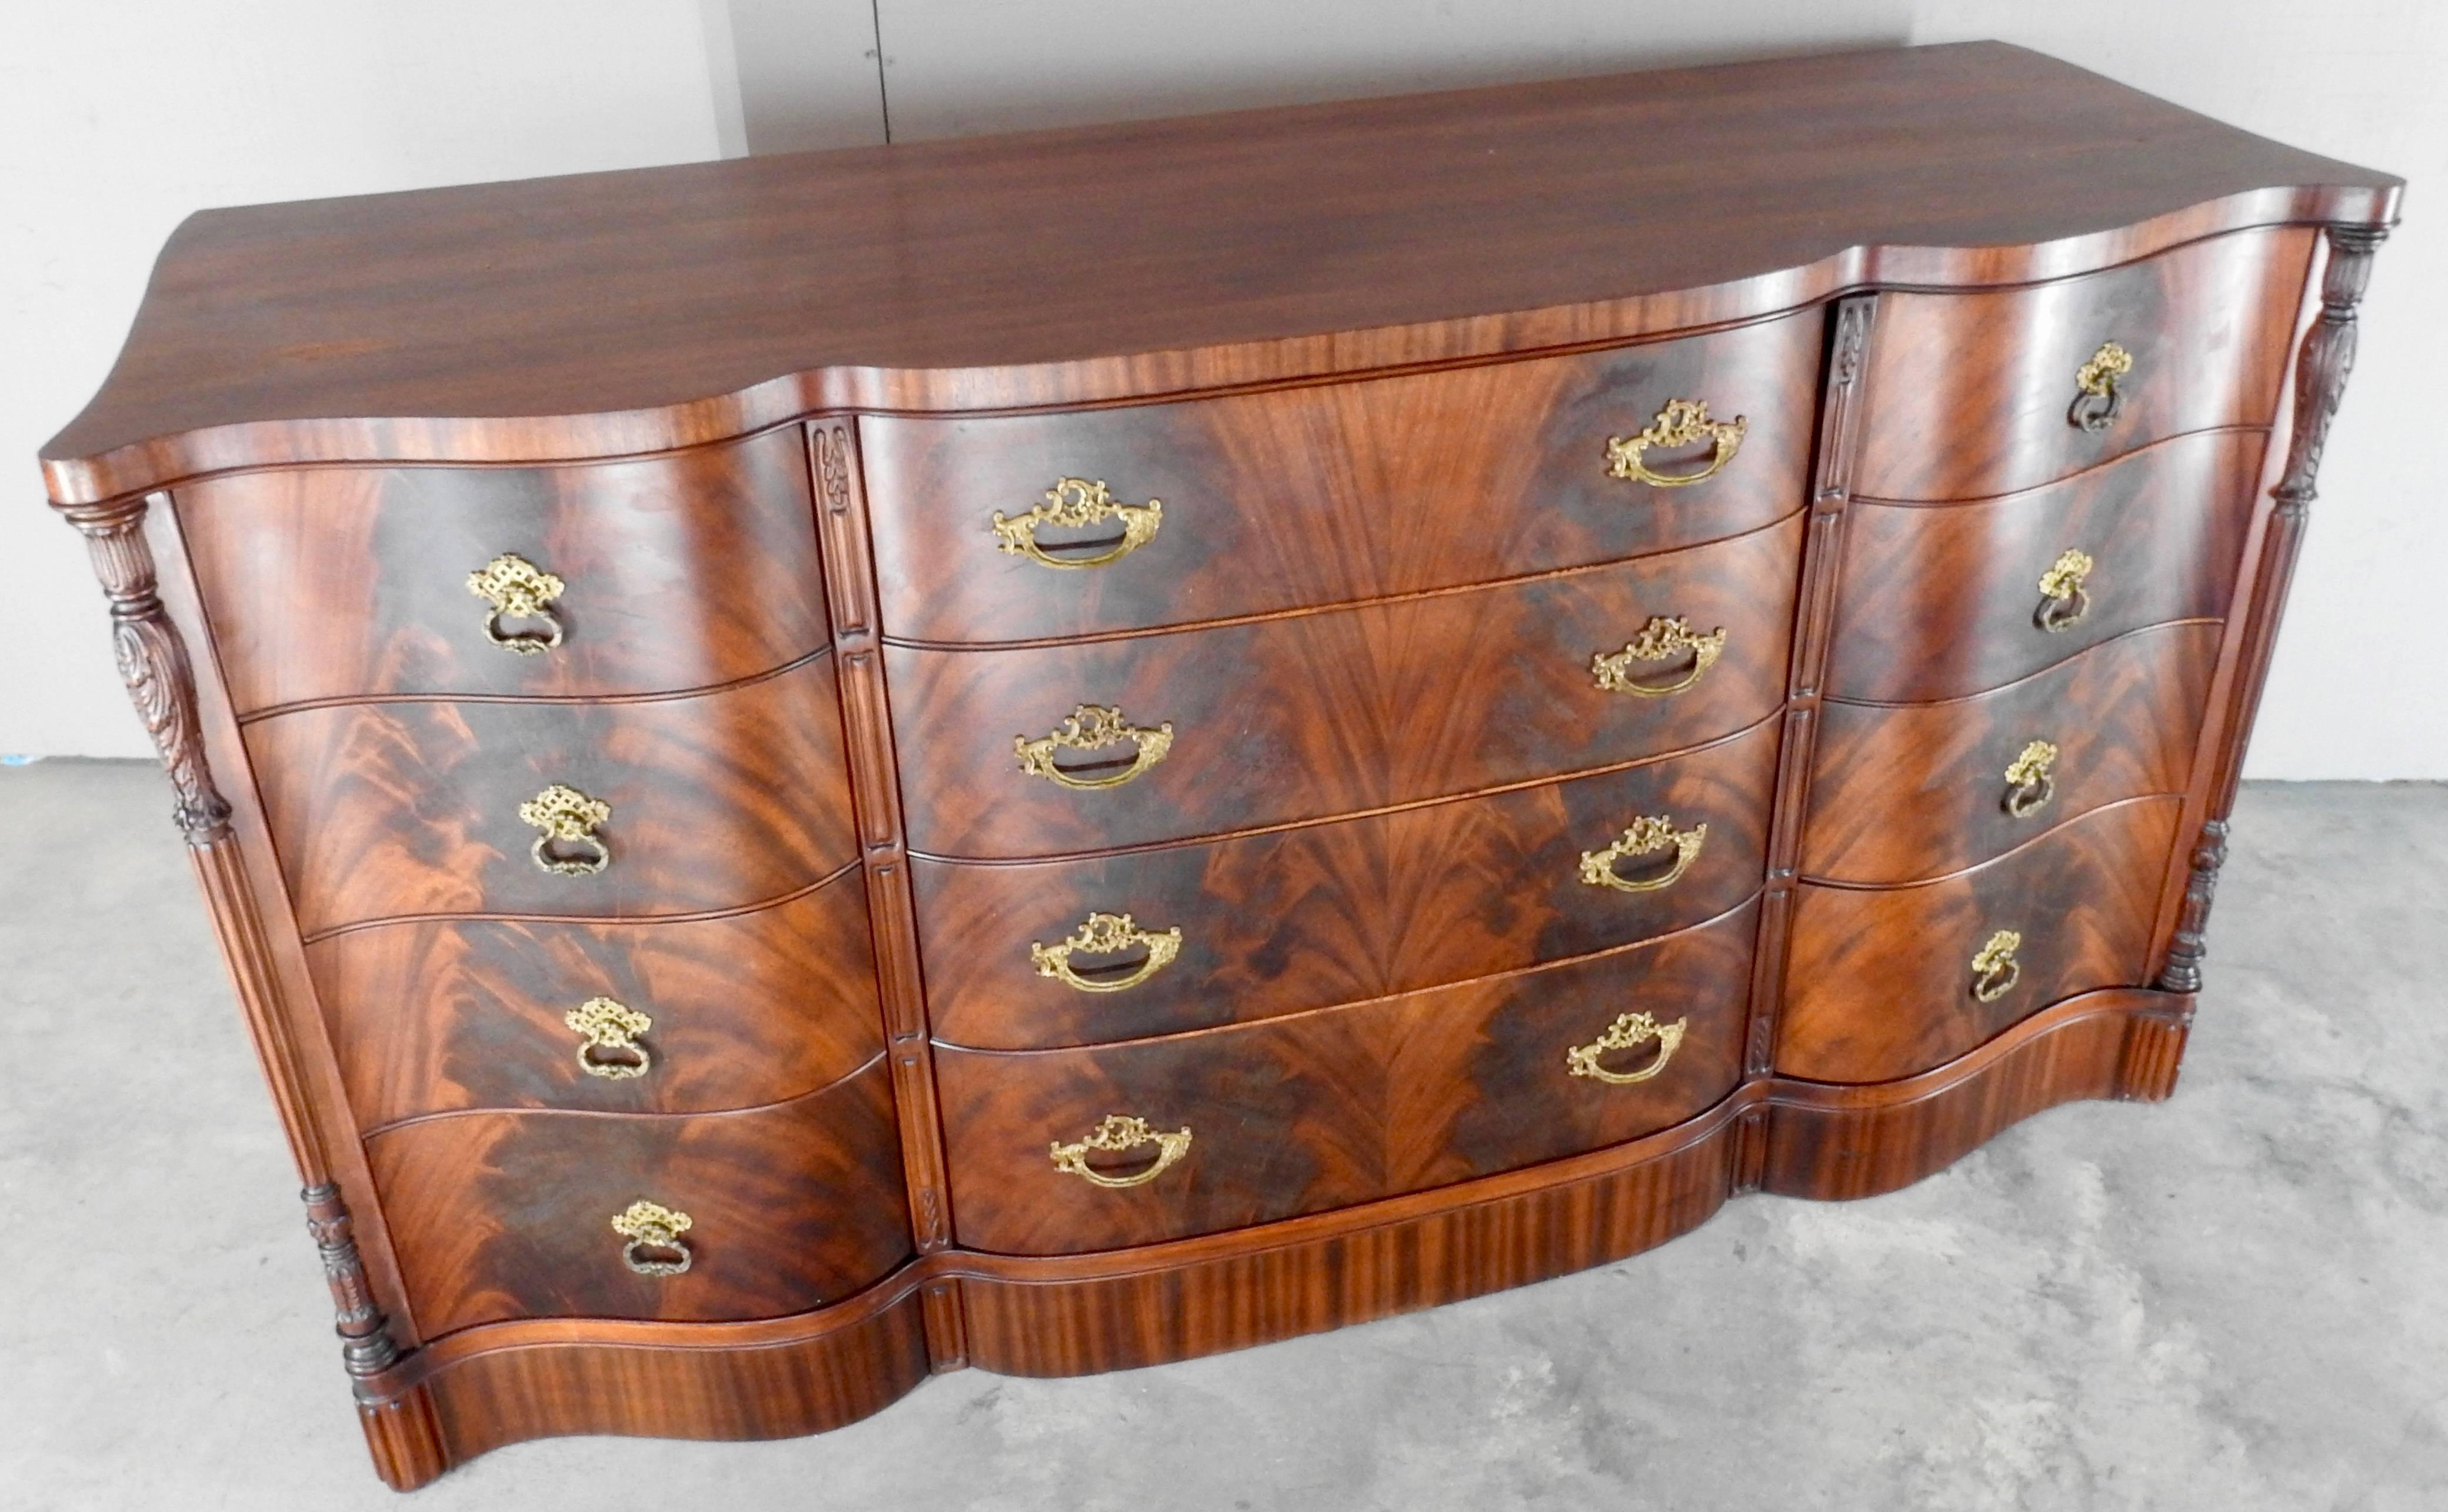 We are offering a superb flame mahogany dresser. An abundance of dove-tailed drawers are decorated with functional bronze pulls. The front is elegantly curved and is accented with carved spindles on each end.